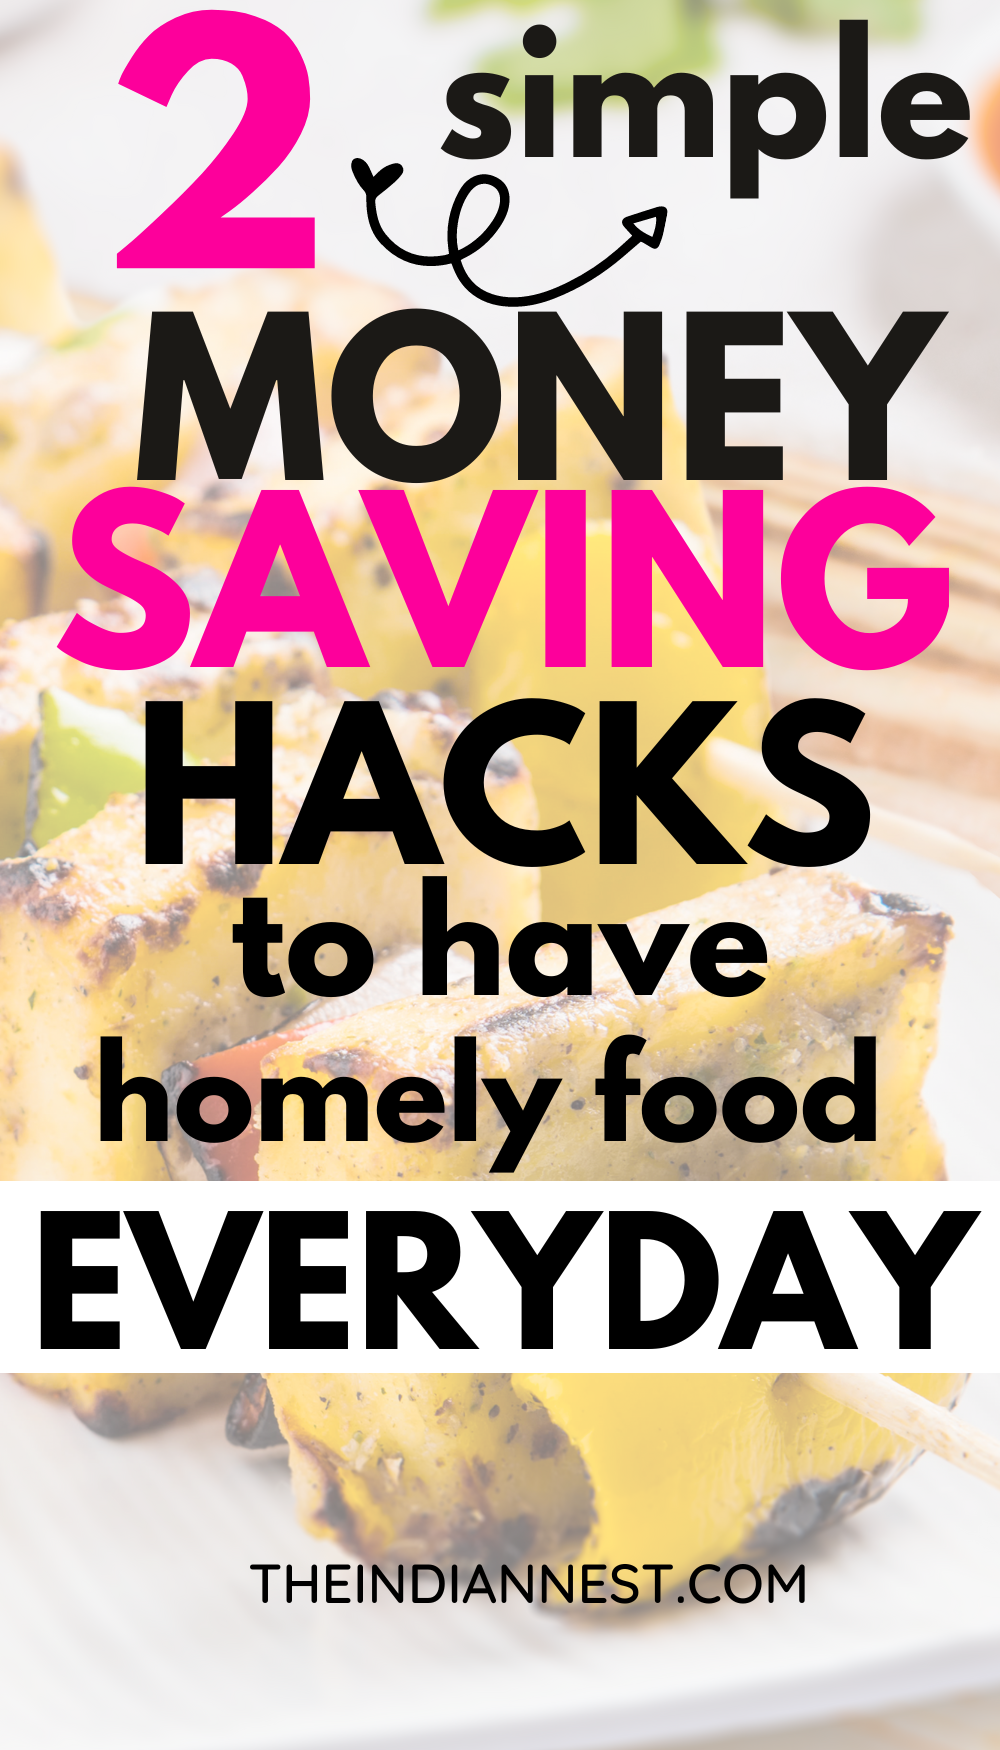 tips to have homely food without cooking everyday